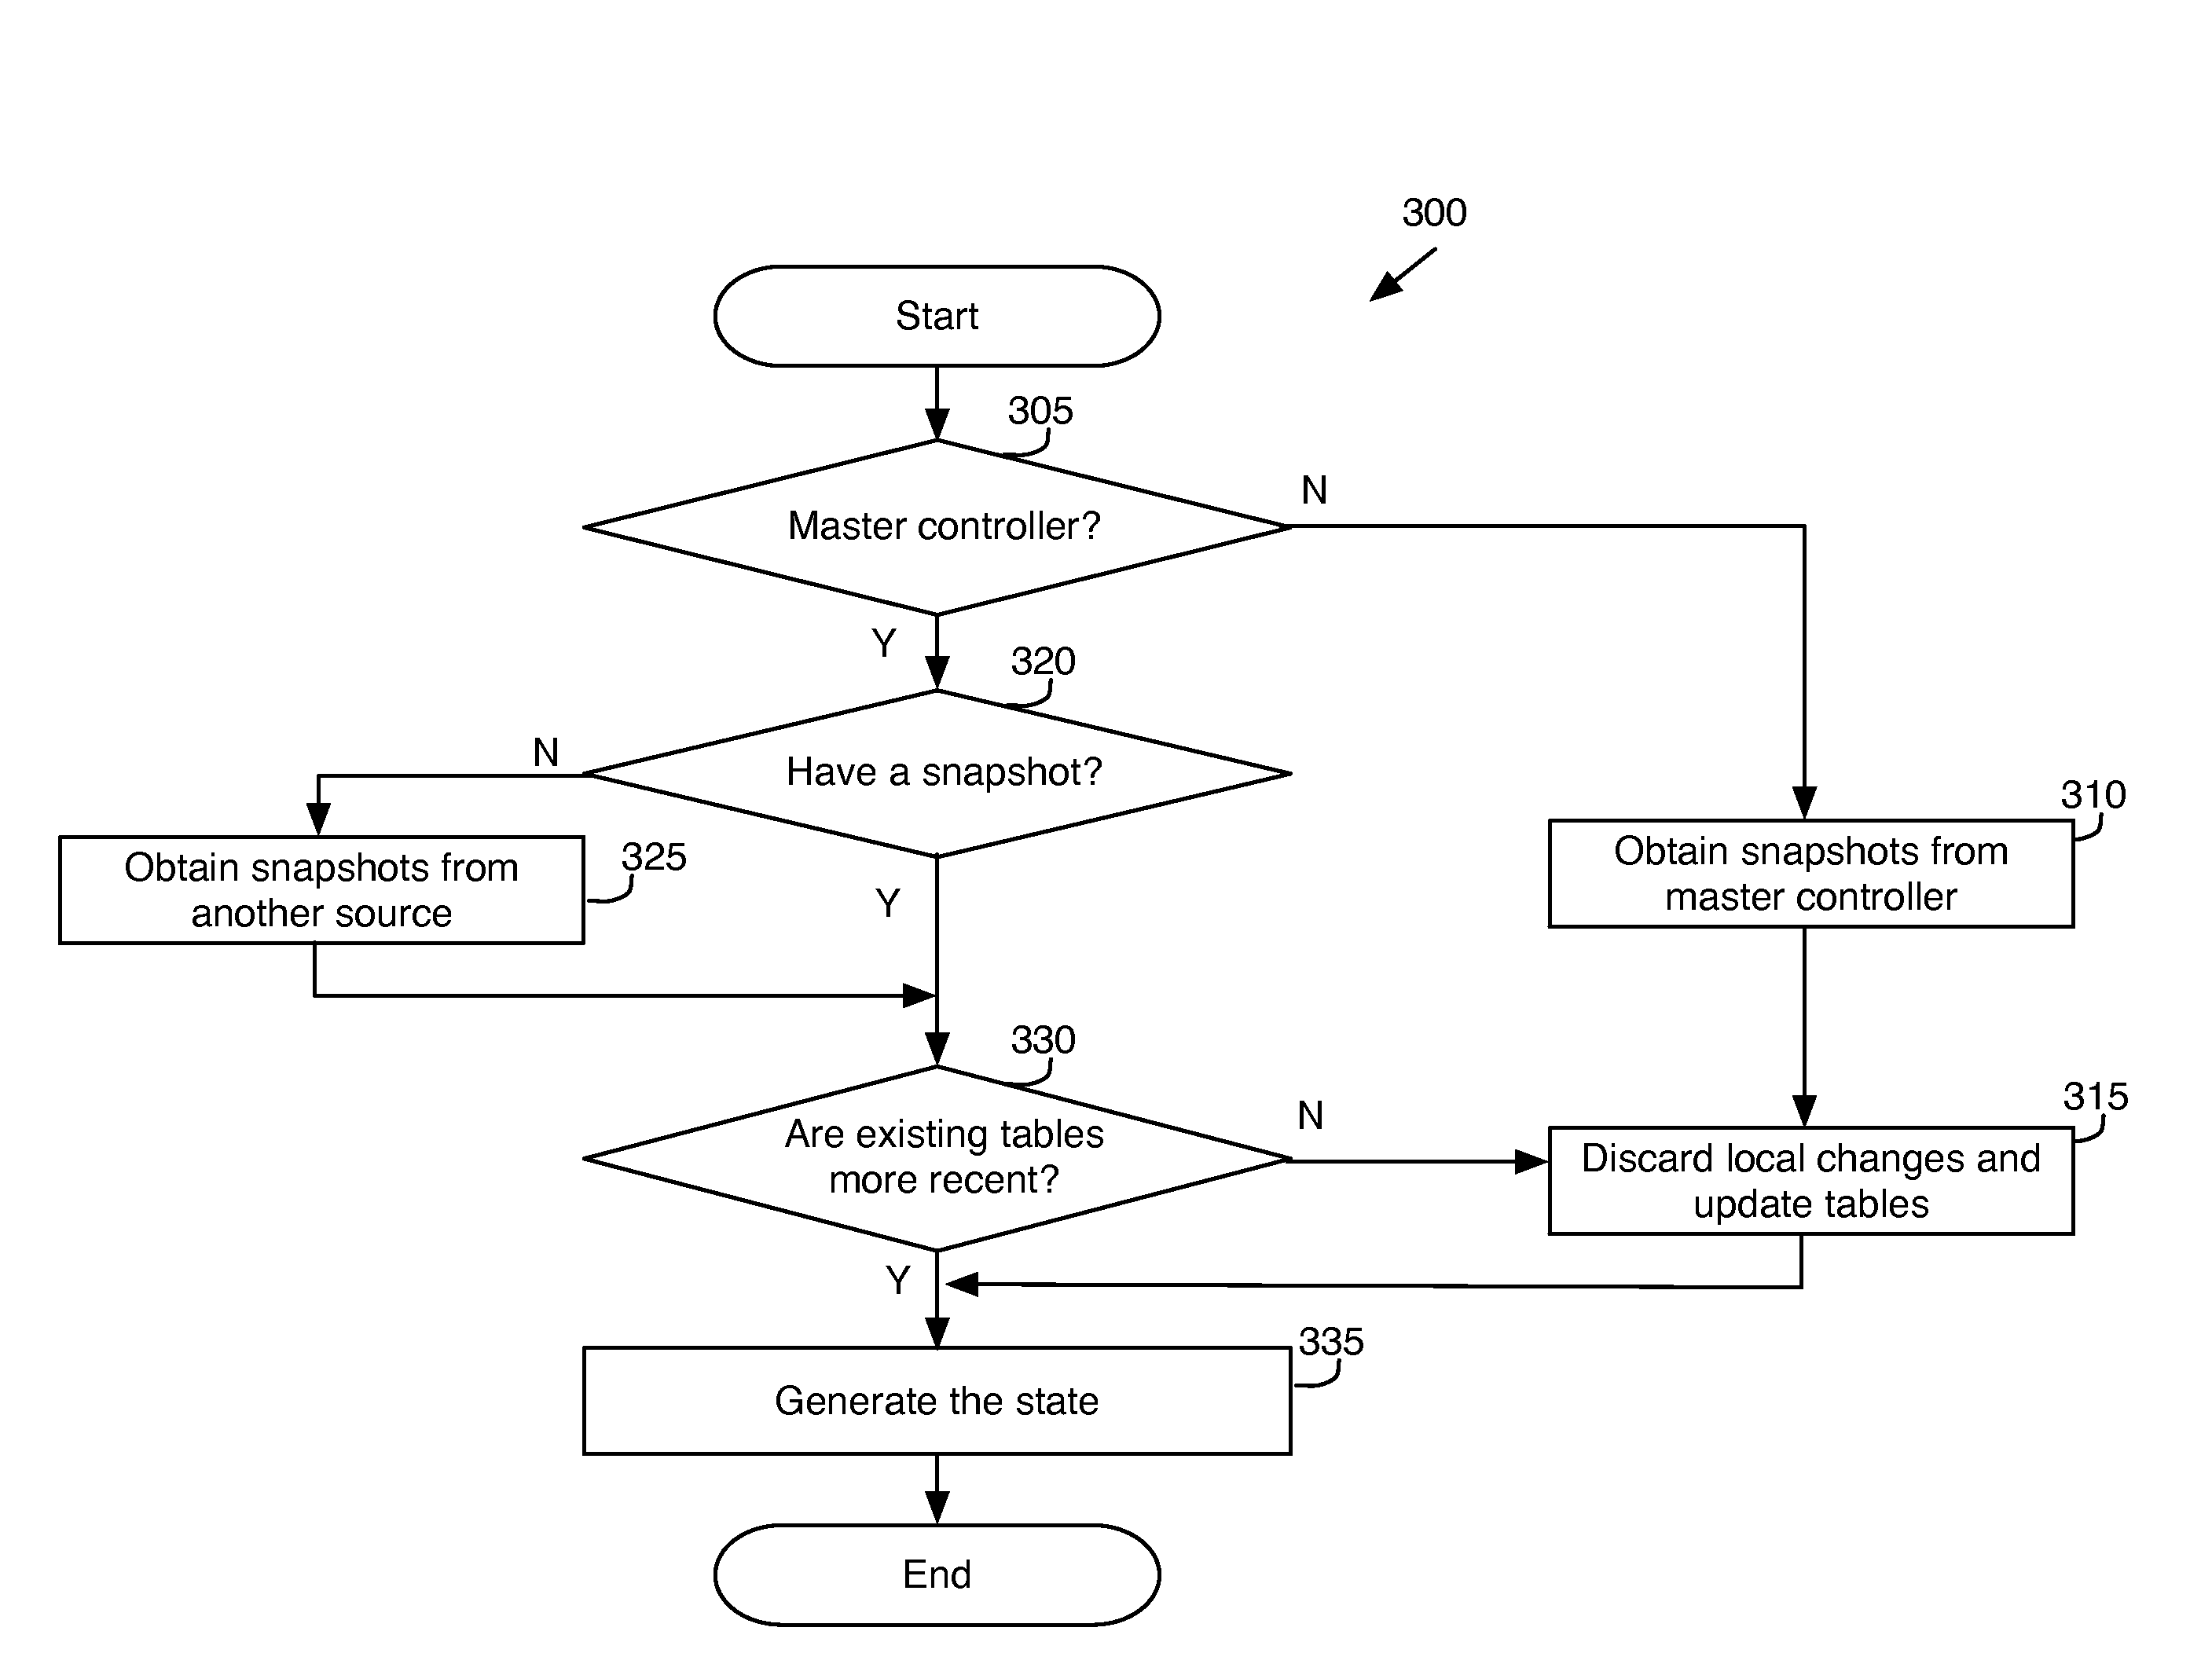 Unified replication mechanism for fault-tolerance of state